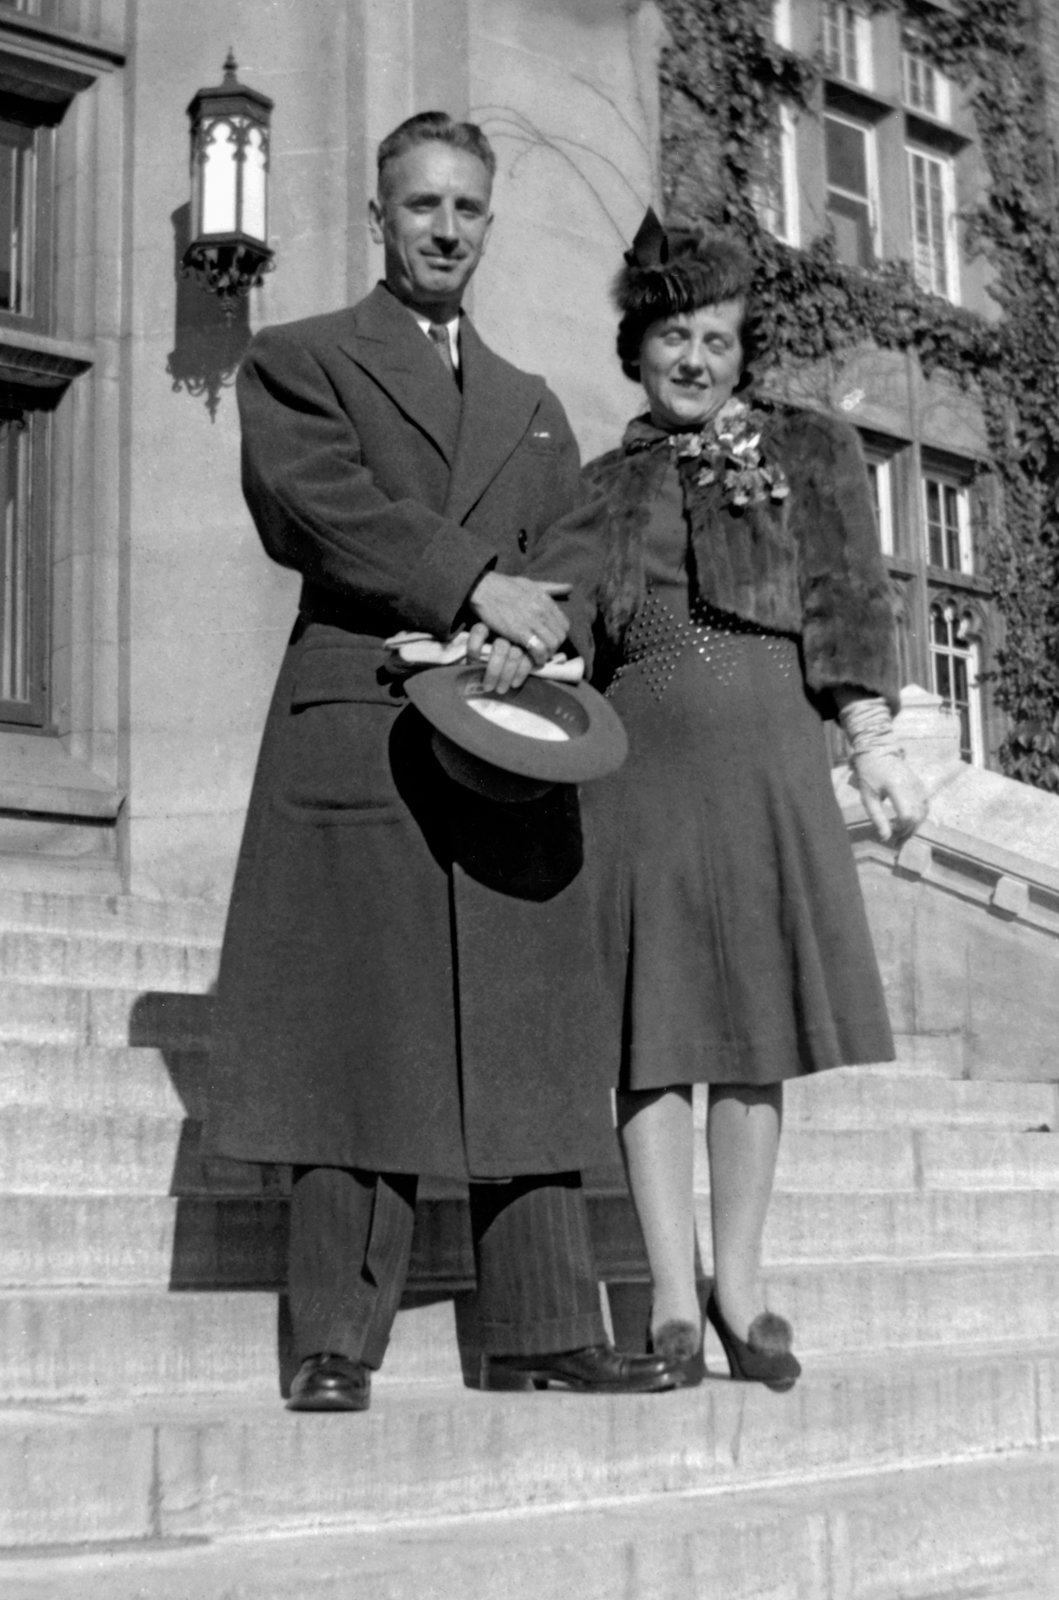 Percy Shea and Hilda Tierney on their wedding day on October 1940 at Loyola College in the NDG neighbourhood of Montreal.